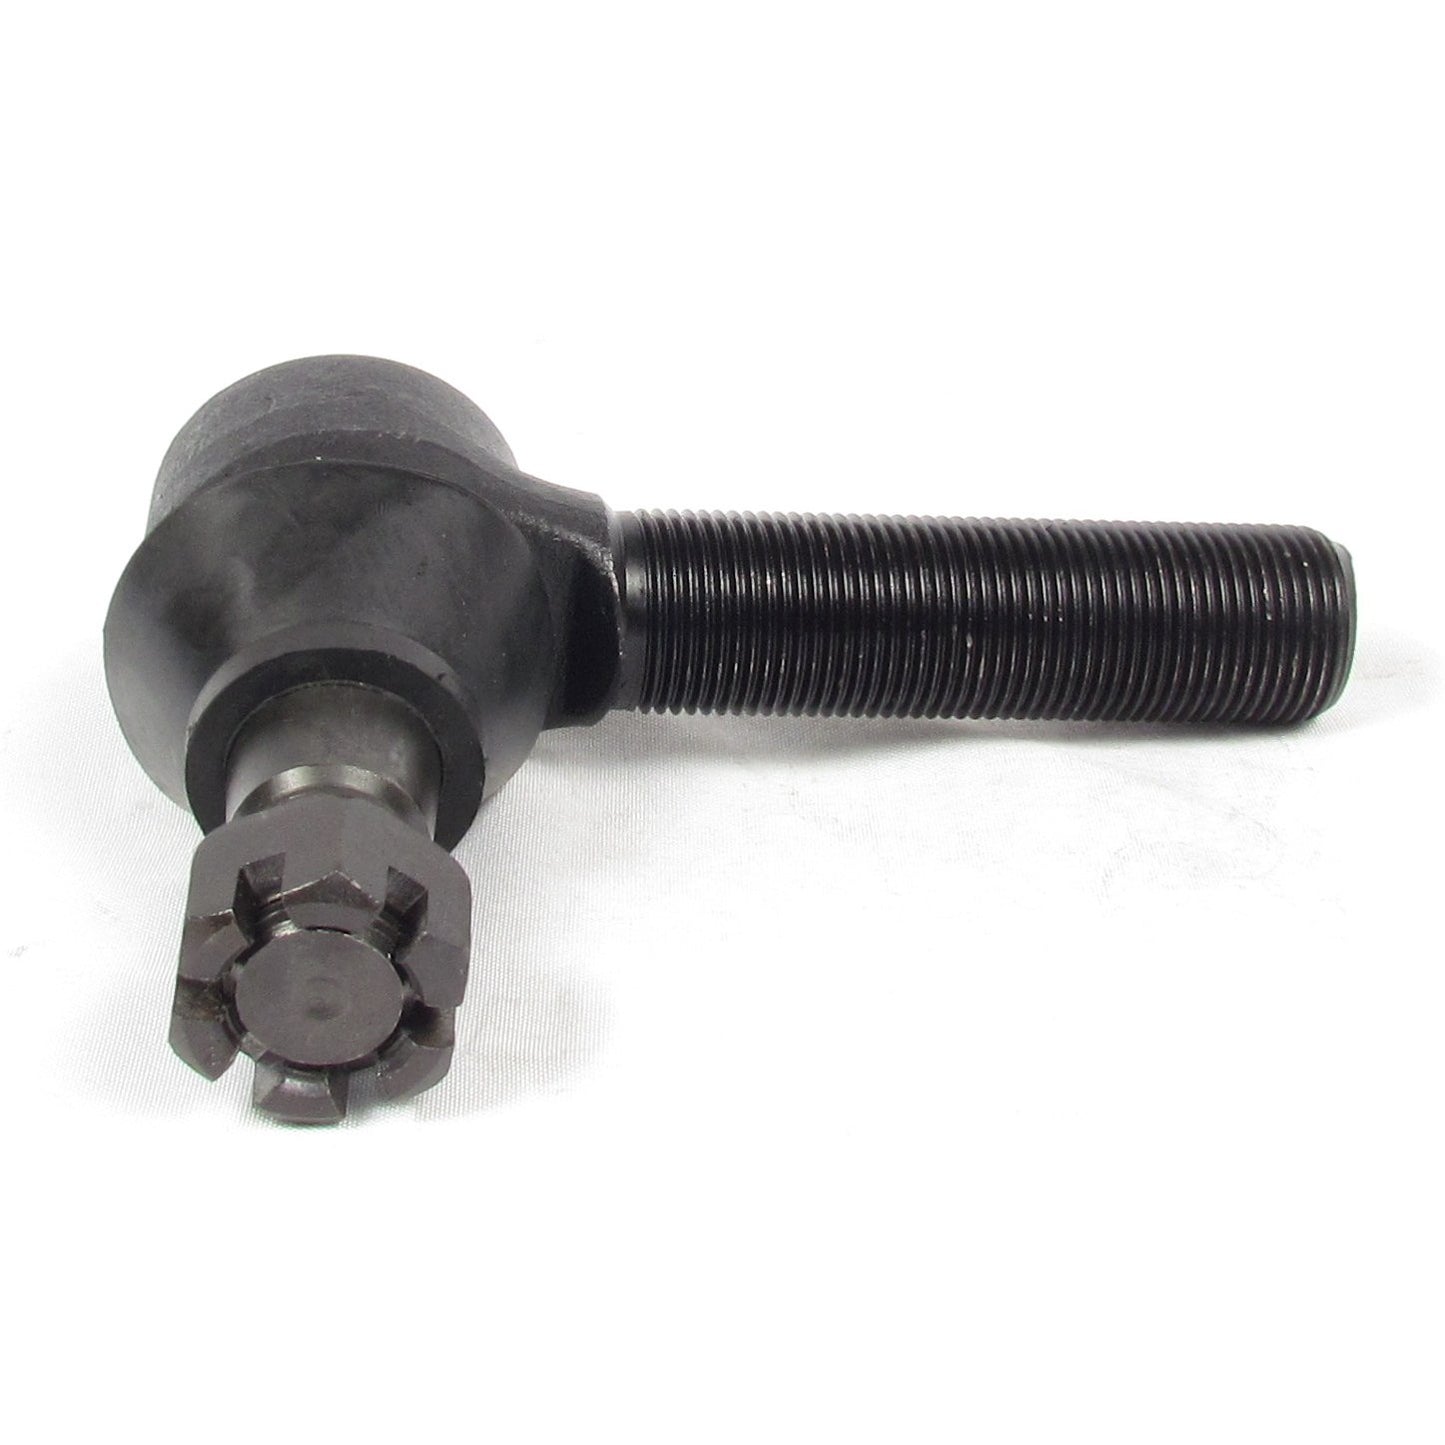 Fortpro Tie Rod End Compatible with Mack, International | Replaces R230068-Left Side/R230069-Right Side | F265858-F265859